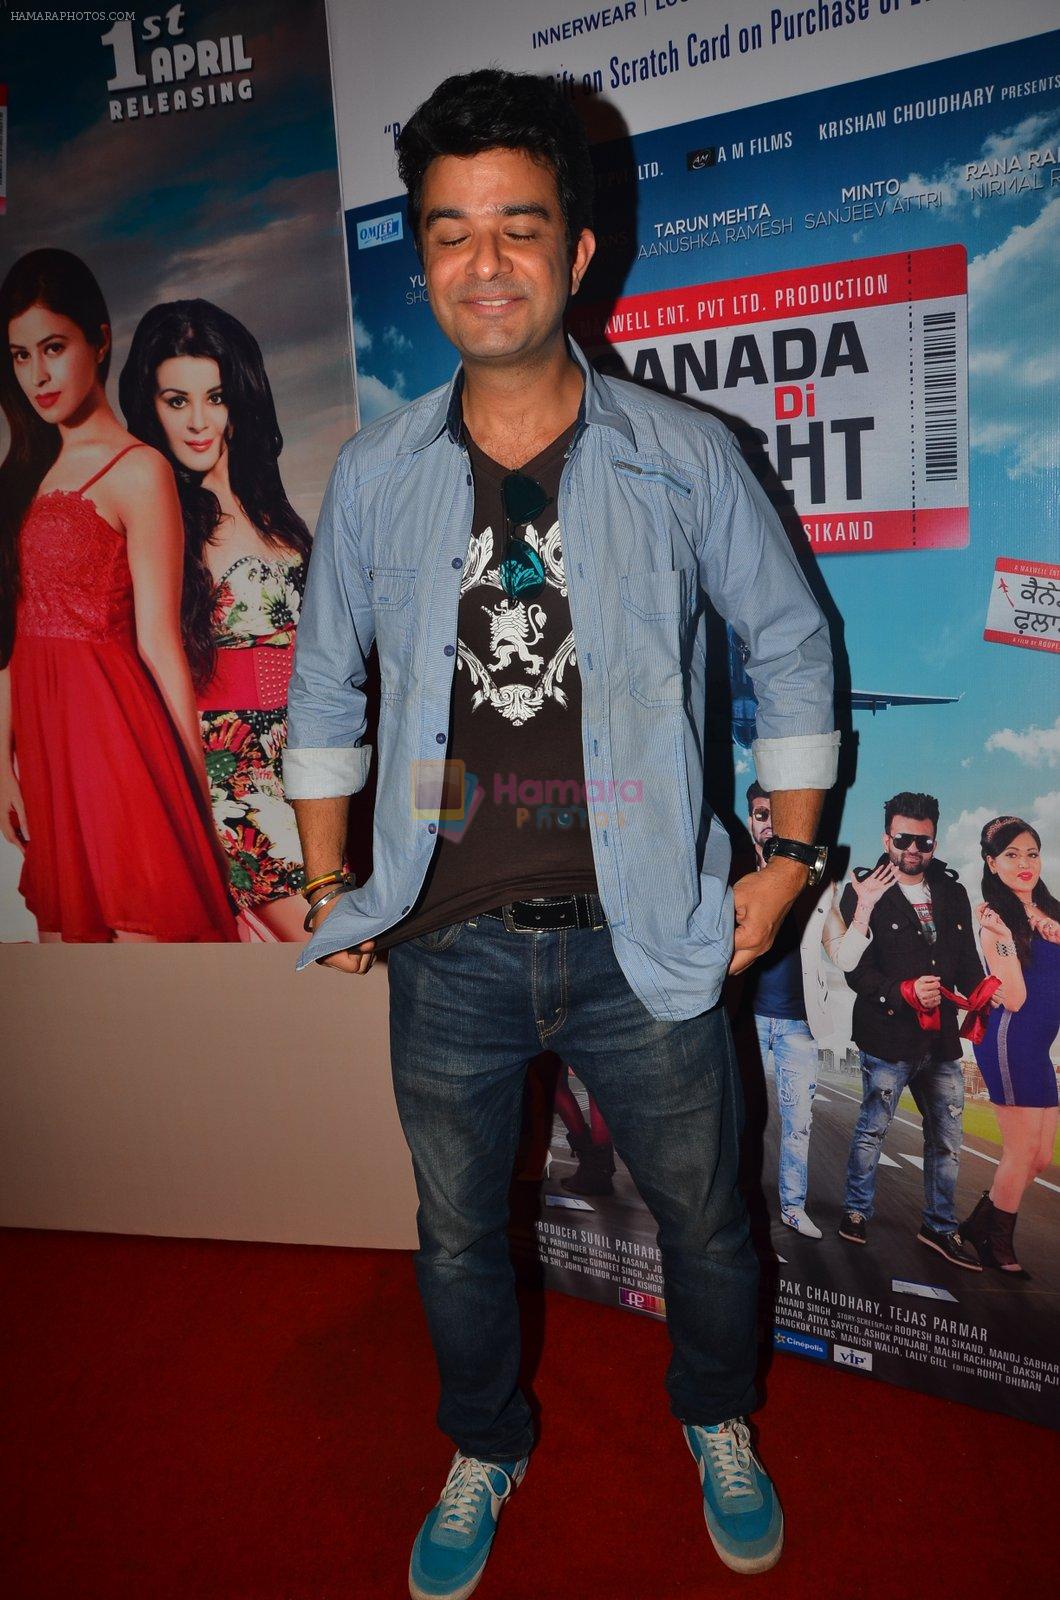 at the launch of film Canada Flight on 26th March 2016